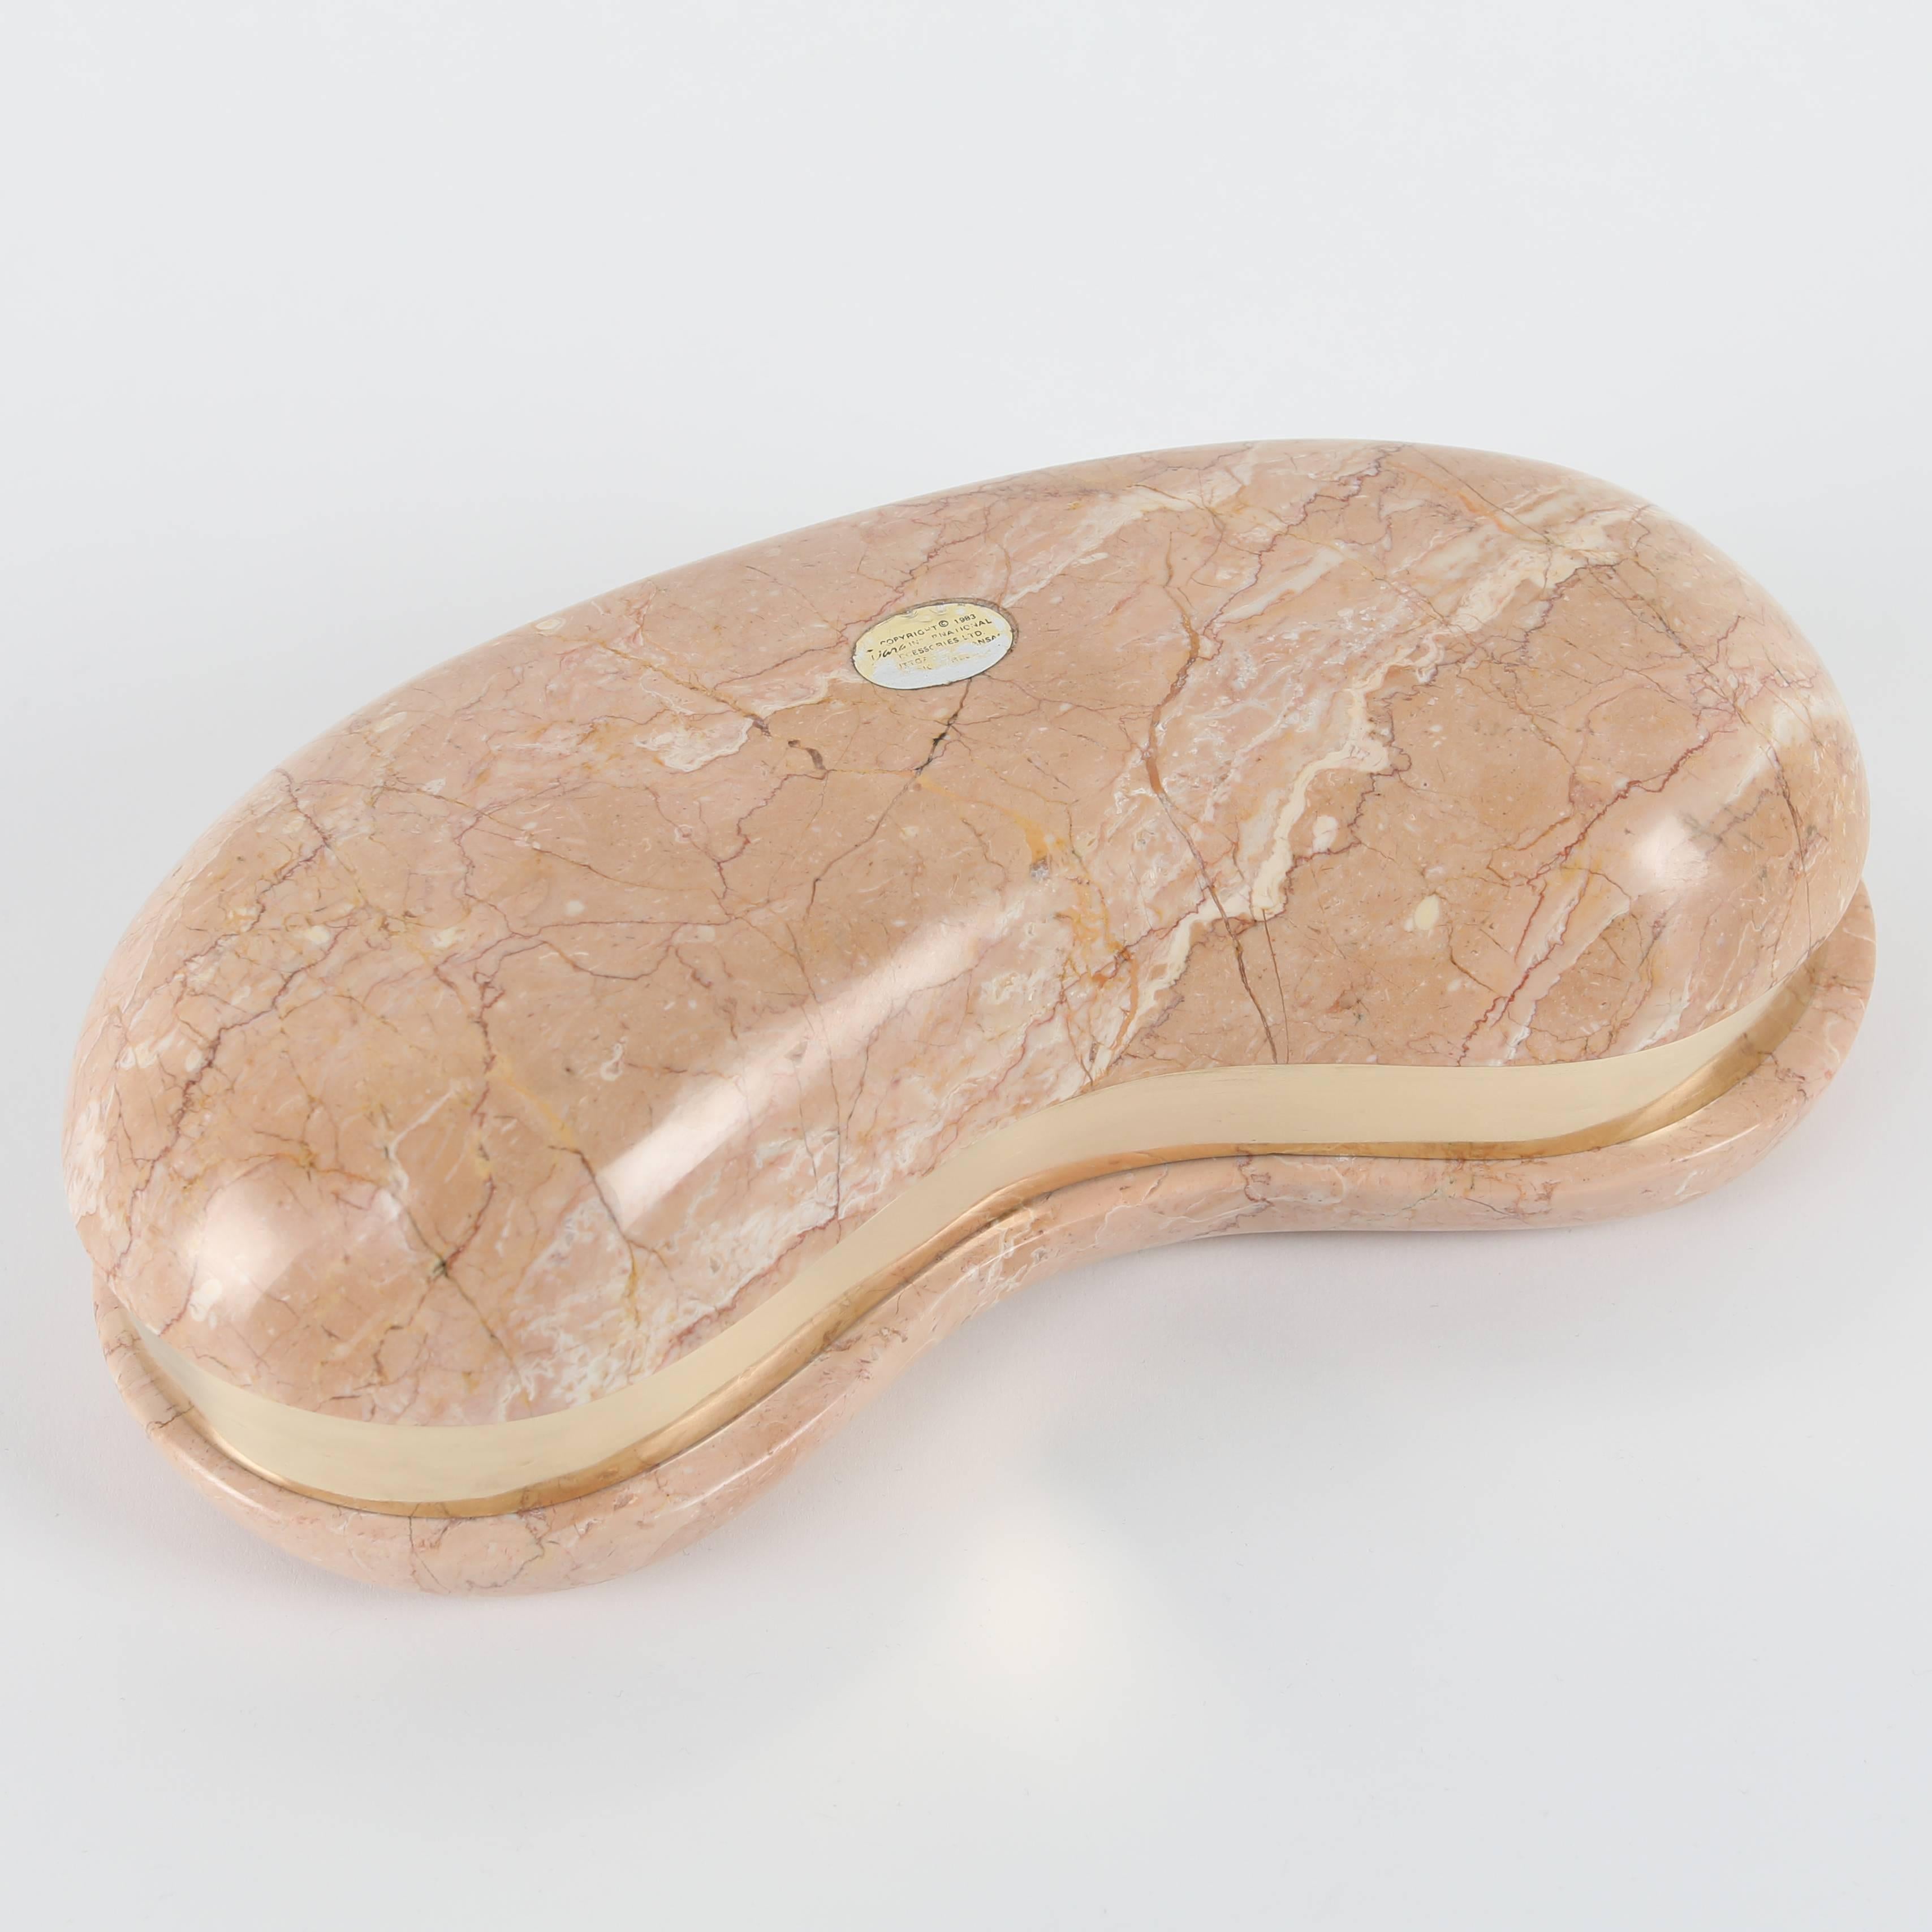 Kidney-Shaped Marble Box by Dara International, circa 1983 For Sale 1